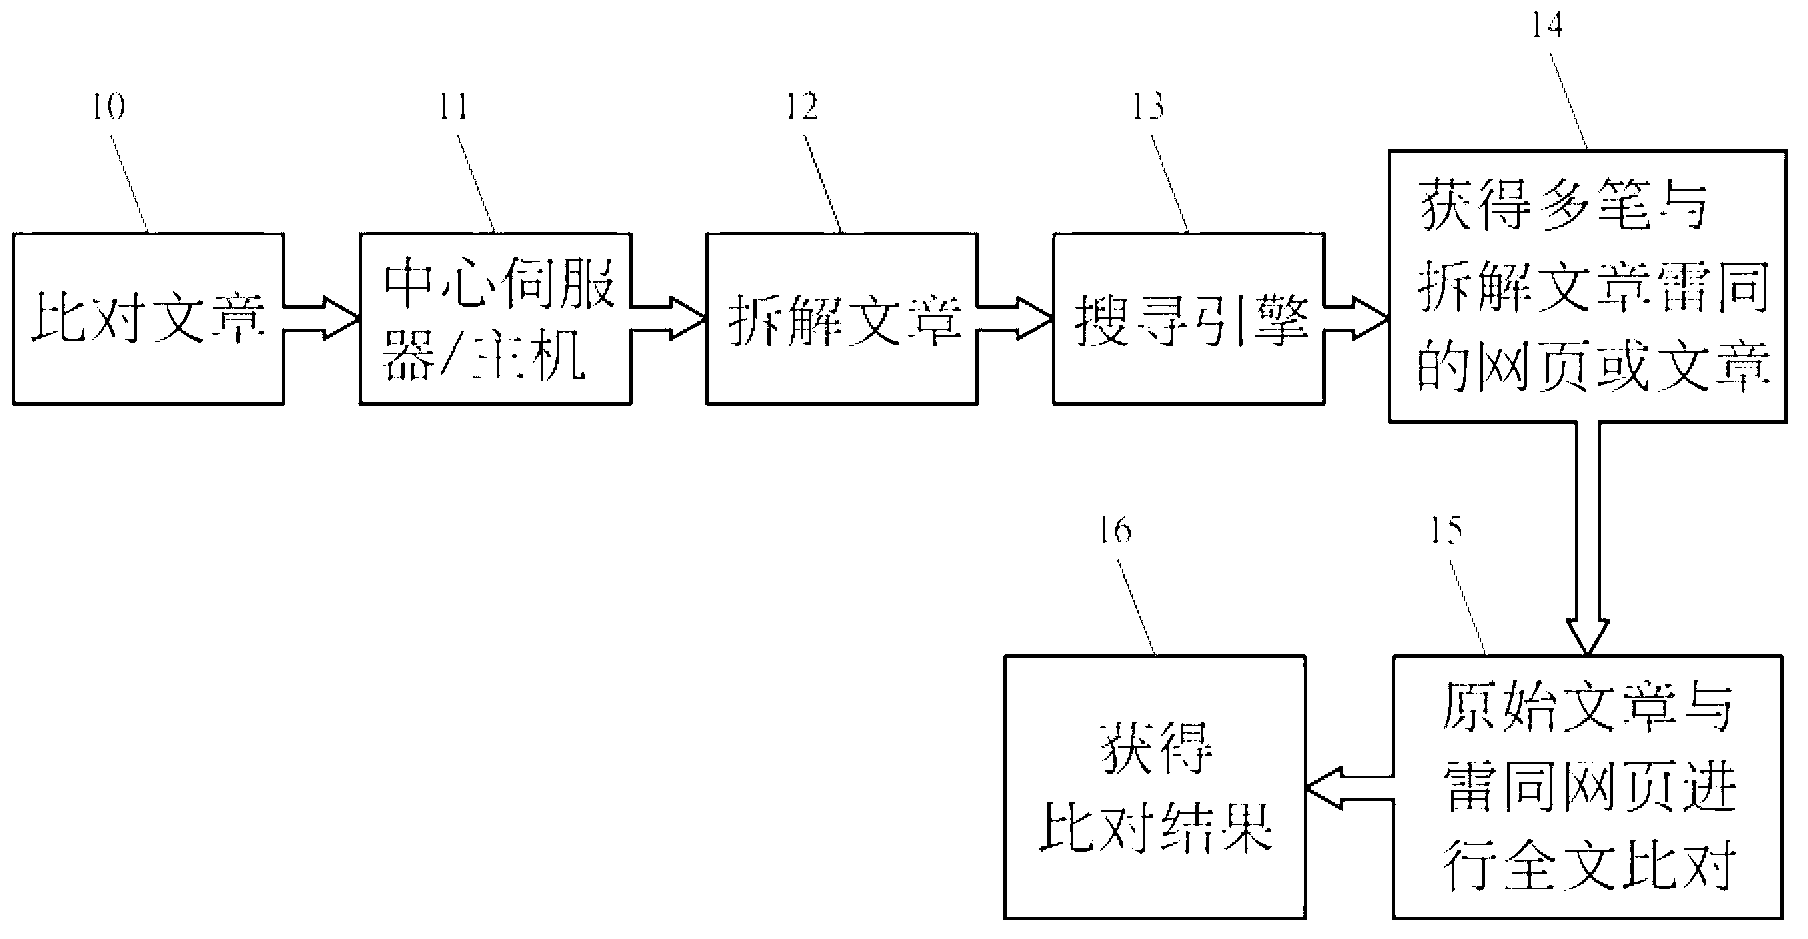 Chinese numeral anti-plagiarism detection comparison system and method